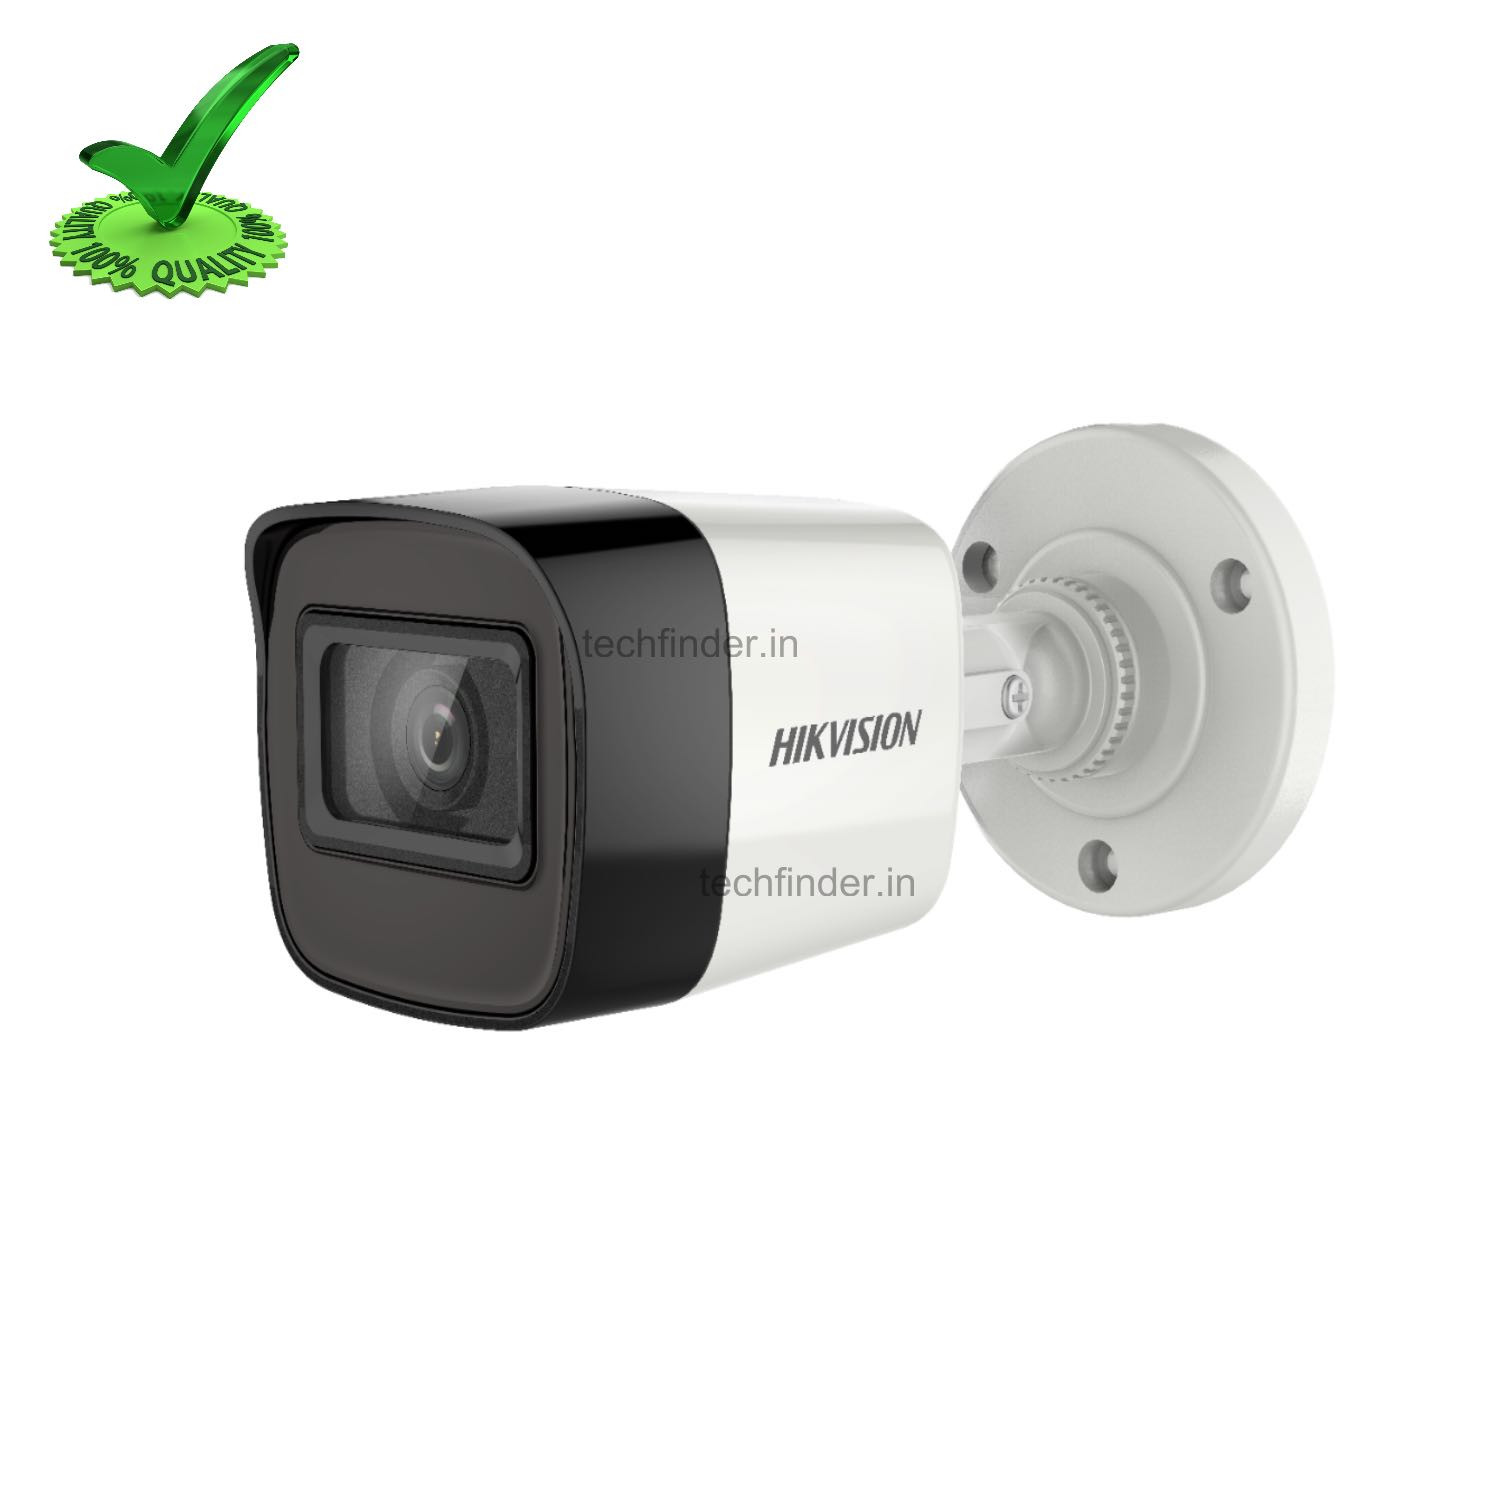 Hikvision DS-2CE16D3T-ITF 2MP Fully Metal HD Bullet Camera